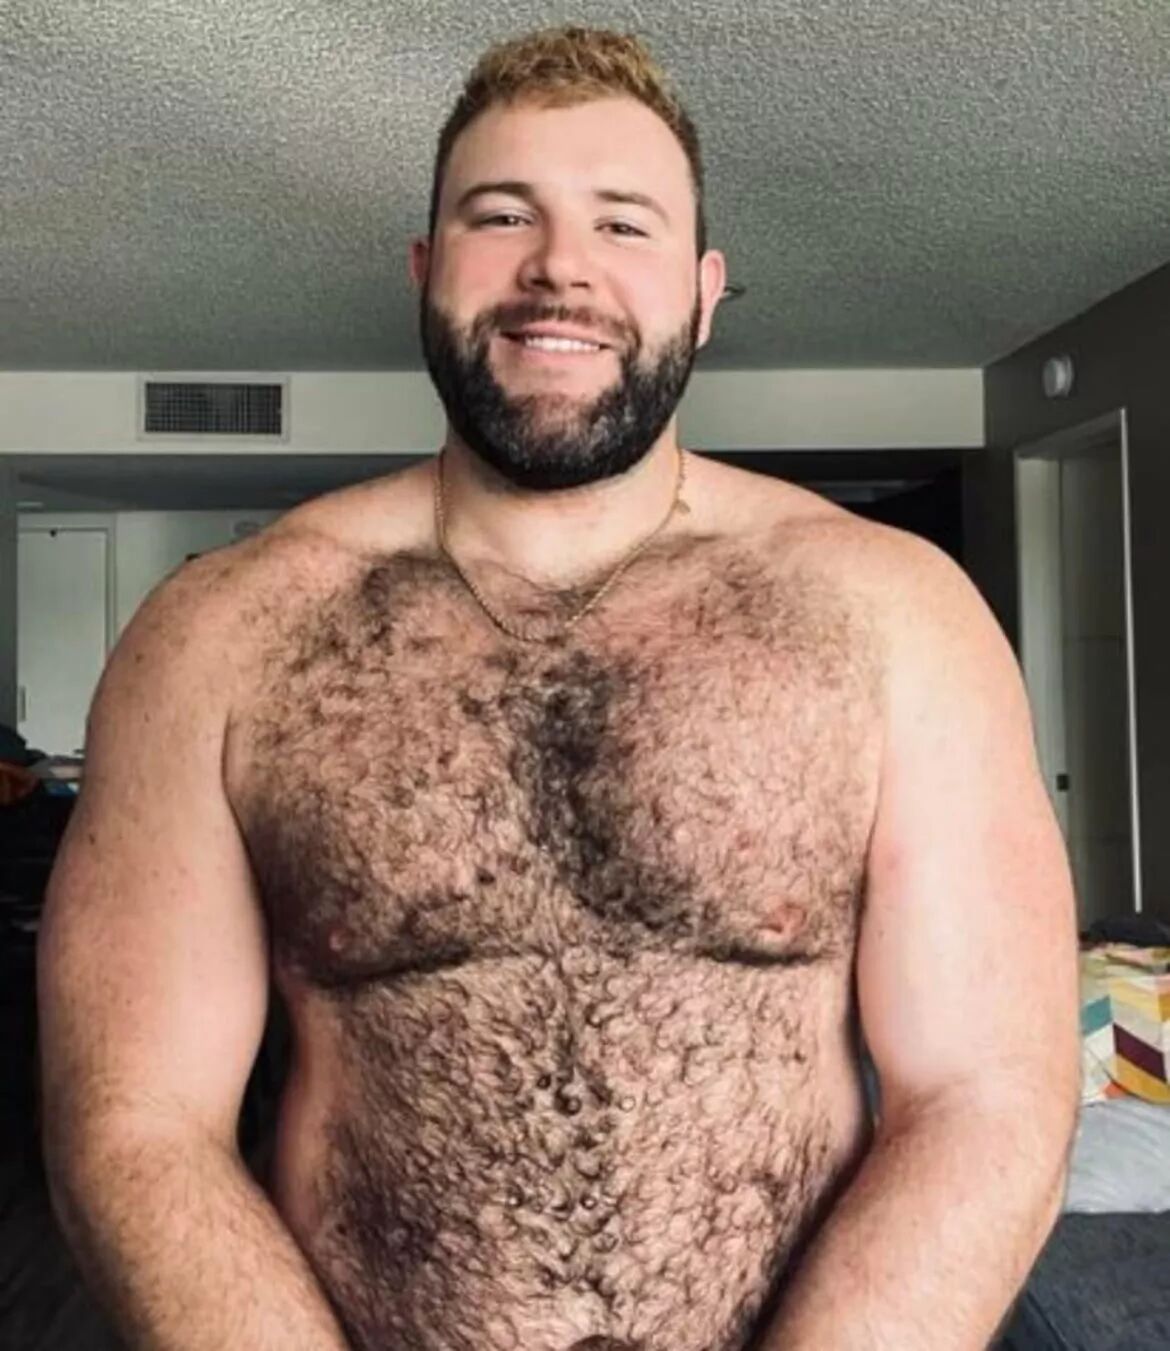 A smiling hairy bear smiles at the camera while sitting in an apartment